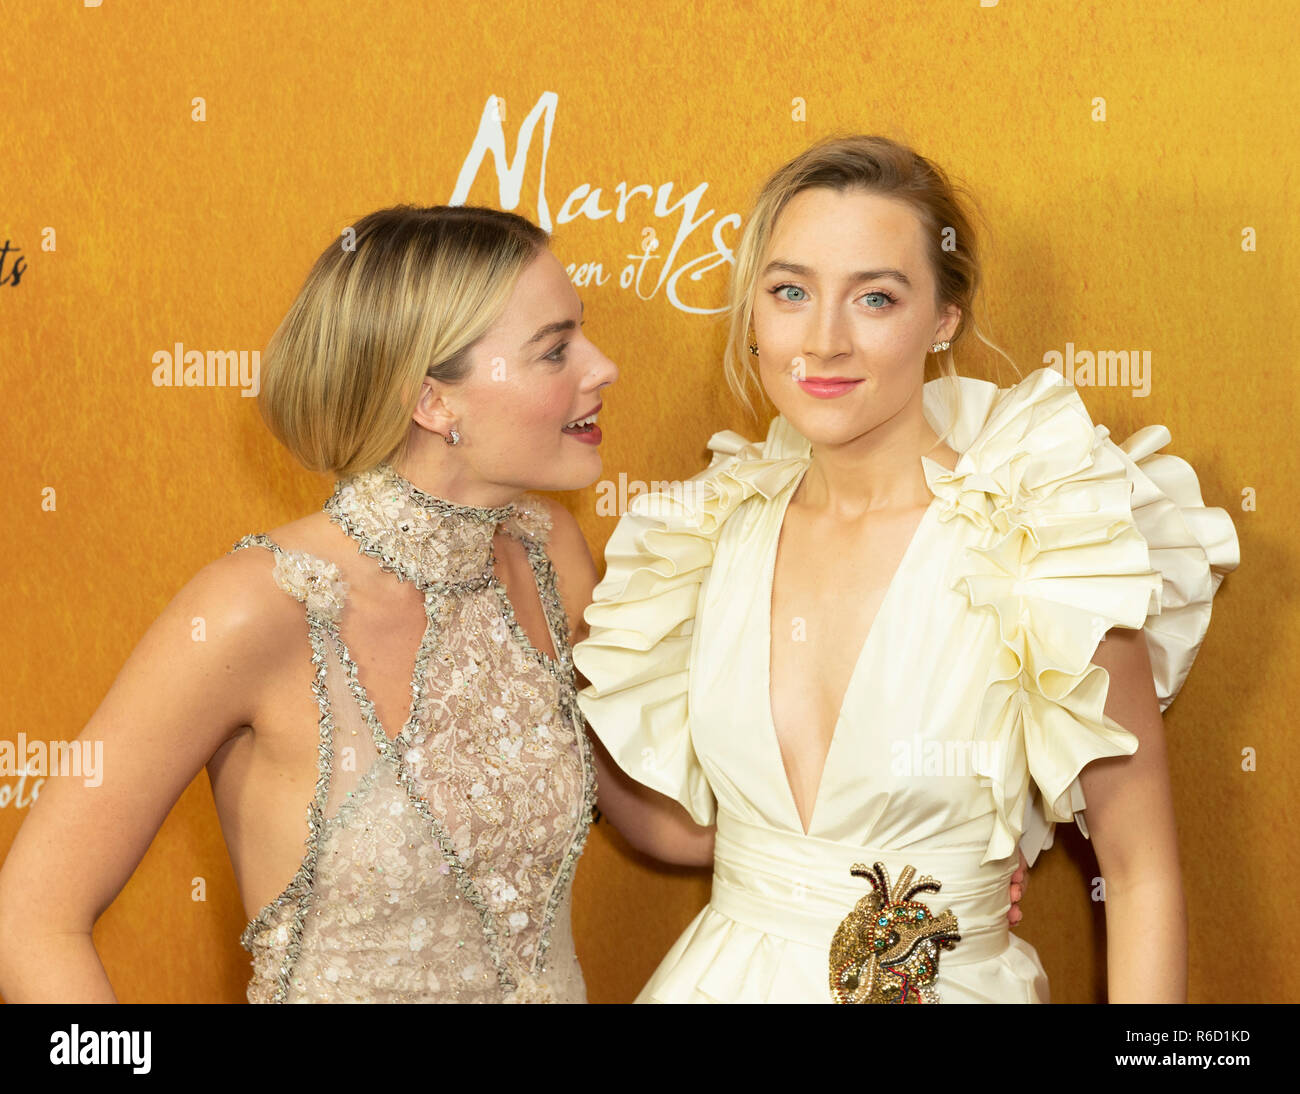 New York, United States. 04th Dec, 2018. New York, NY - December 4, 2018: Margot Robbie wearing dress by Chanel & Saoirse Ronan wearing dress by Gucci attend the New York premiere of 'Mary Queen Of Scots' at Paris Theater Credit: lev radin/Alamy Live News Stock Photo